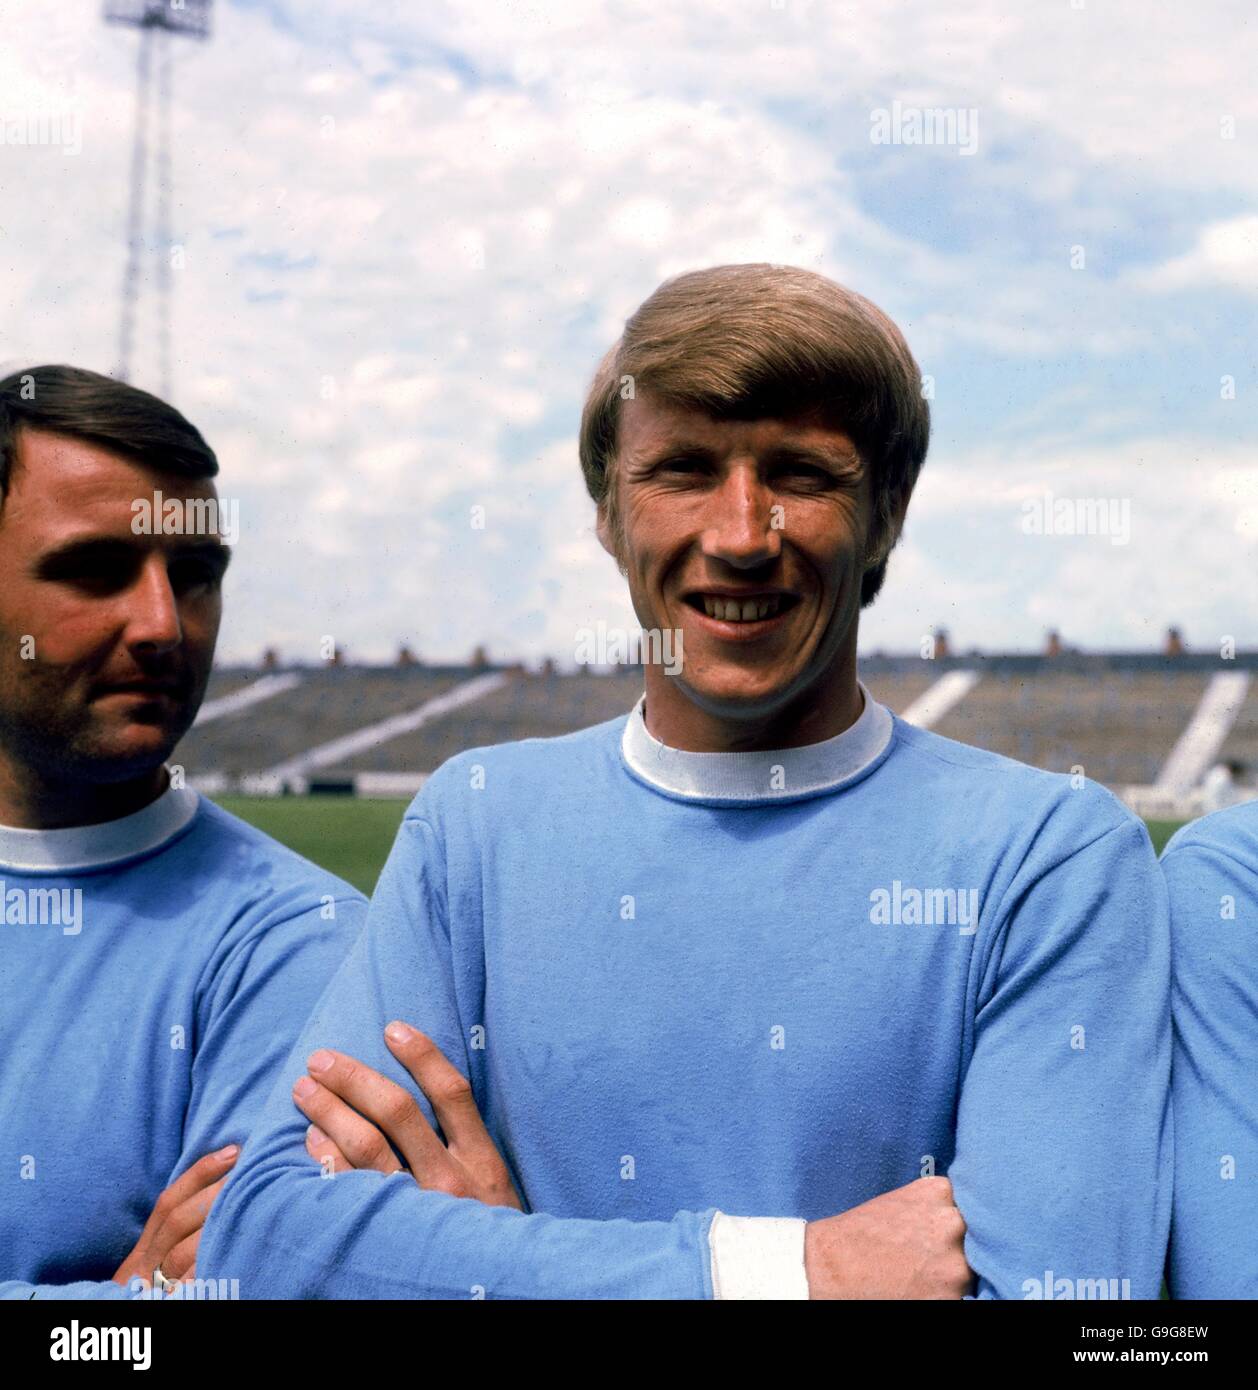 Fußball - Football League Division One - Manchester City Photocall. Colin Bell, Manchester City Stockfoto